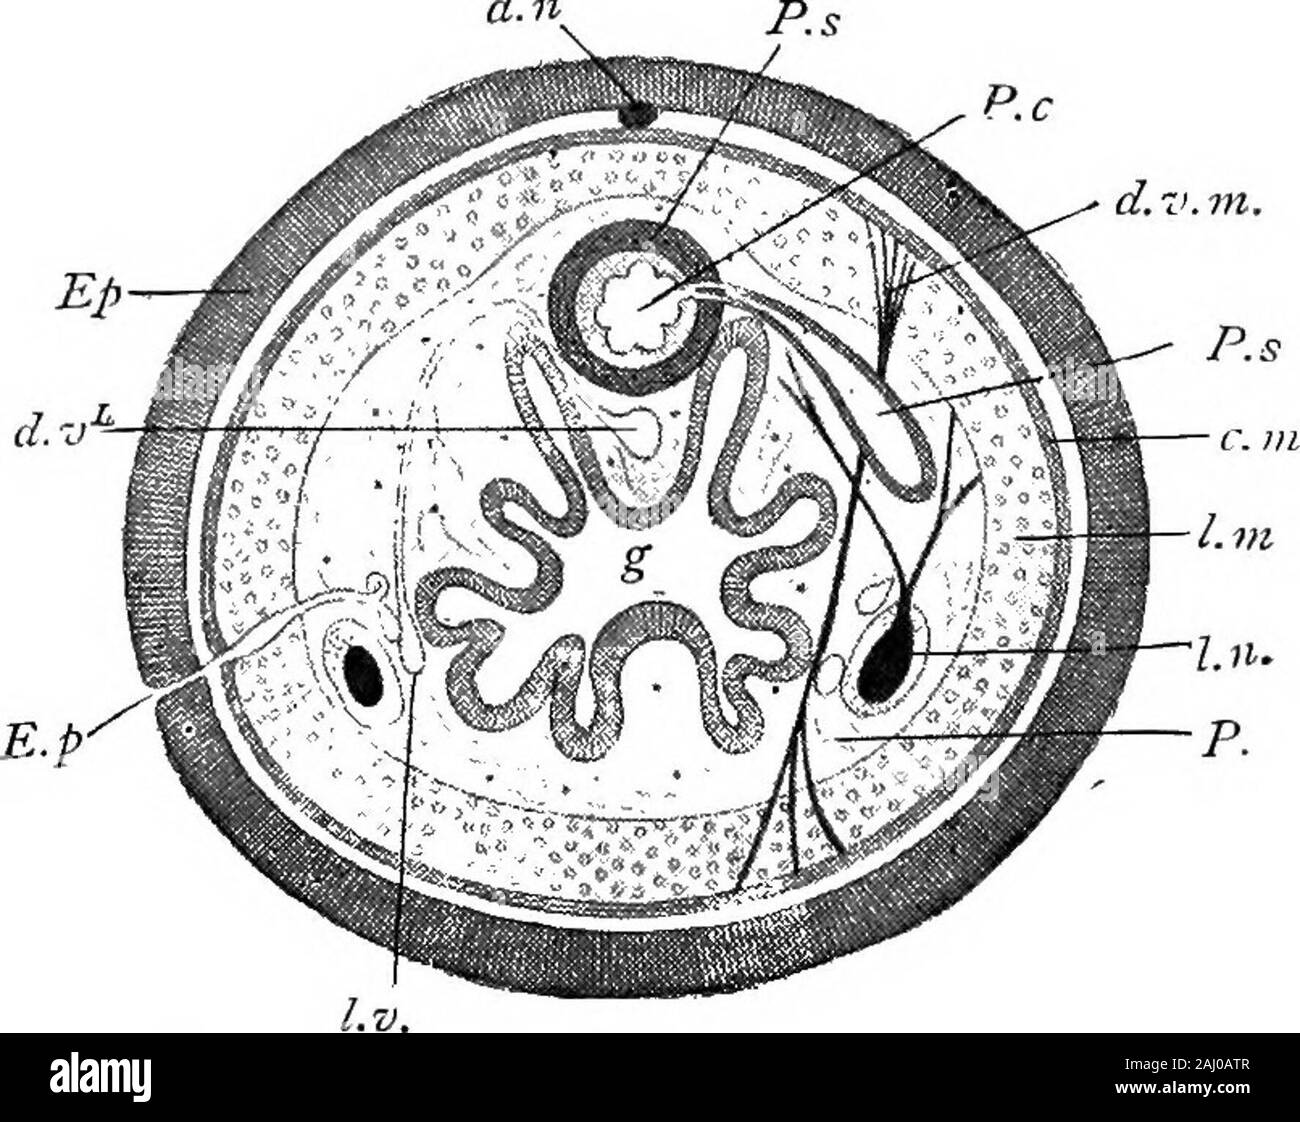 Outlines of zoology . a. Fig. 103.—Diagrammatic longitudinal sectionof a Nemertean (Amphiporus laciijioreus),dorsal view.—After MIntosh. ^.^•, Proboscis pore; 6., brain giving off tbe lateralnerve-cords («.); ^o,, oesophageal pocket: p., pro-boscis lying within its sheath;. st., stilet of proboscis ;m., retractor muscles of proboscis ; ^., gut shown inoutline at the sides of the proboscis; e., the threemain longitudinal blood vessels, which unite bothanteriorly and posteriorly. 198 UNSEGMENTED WORMS. General Account of Nemertea In appearance most Nemertines are ribbon- or thread-like, and thec Stock Photo